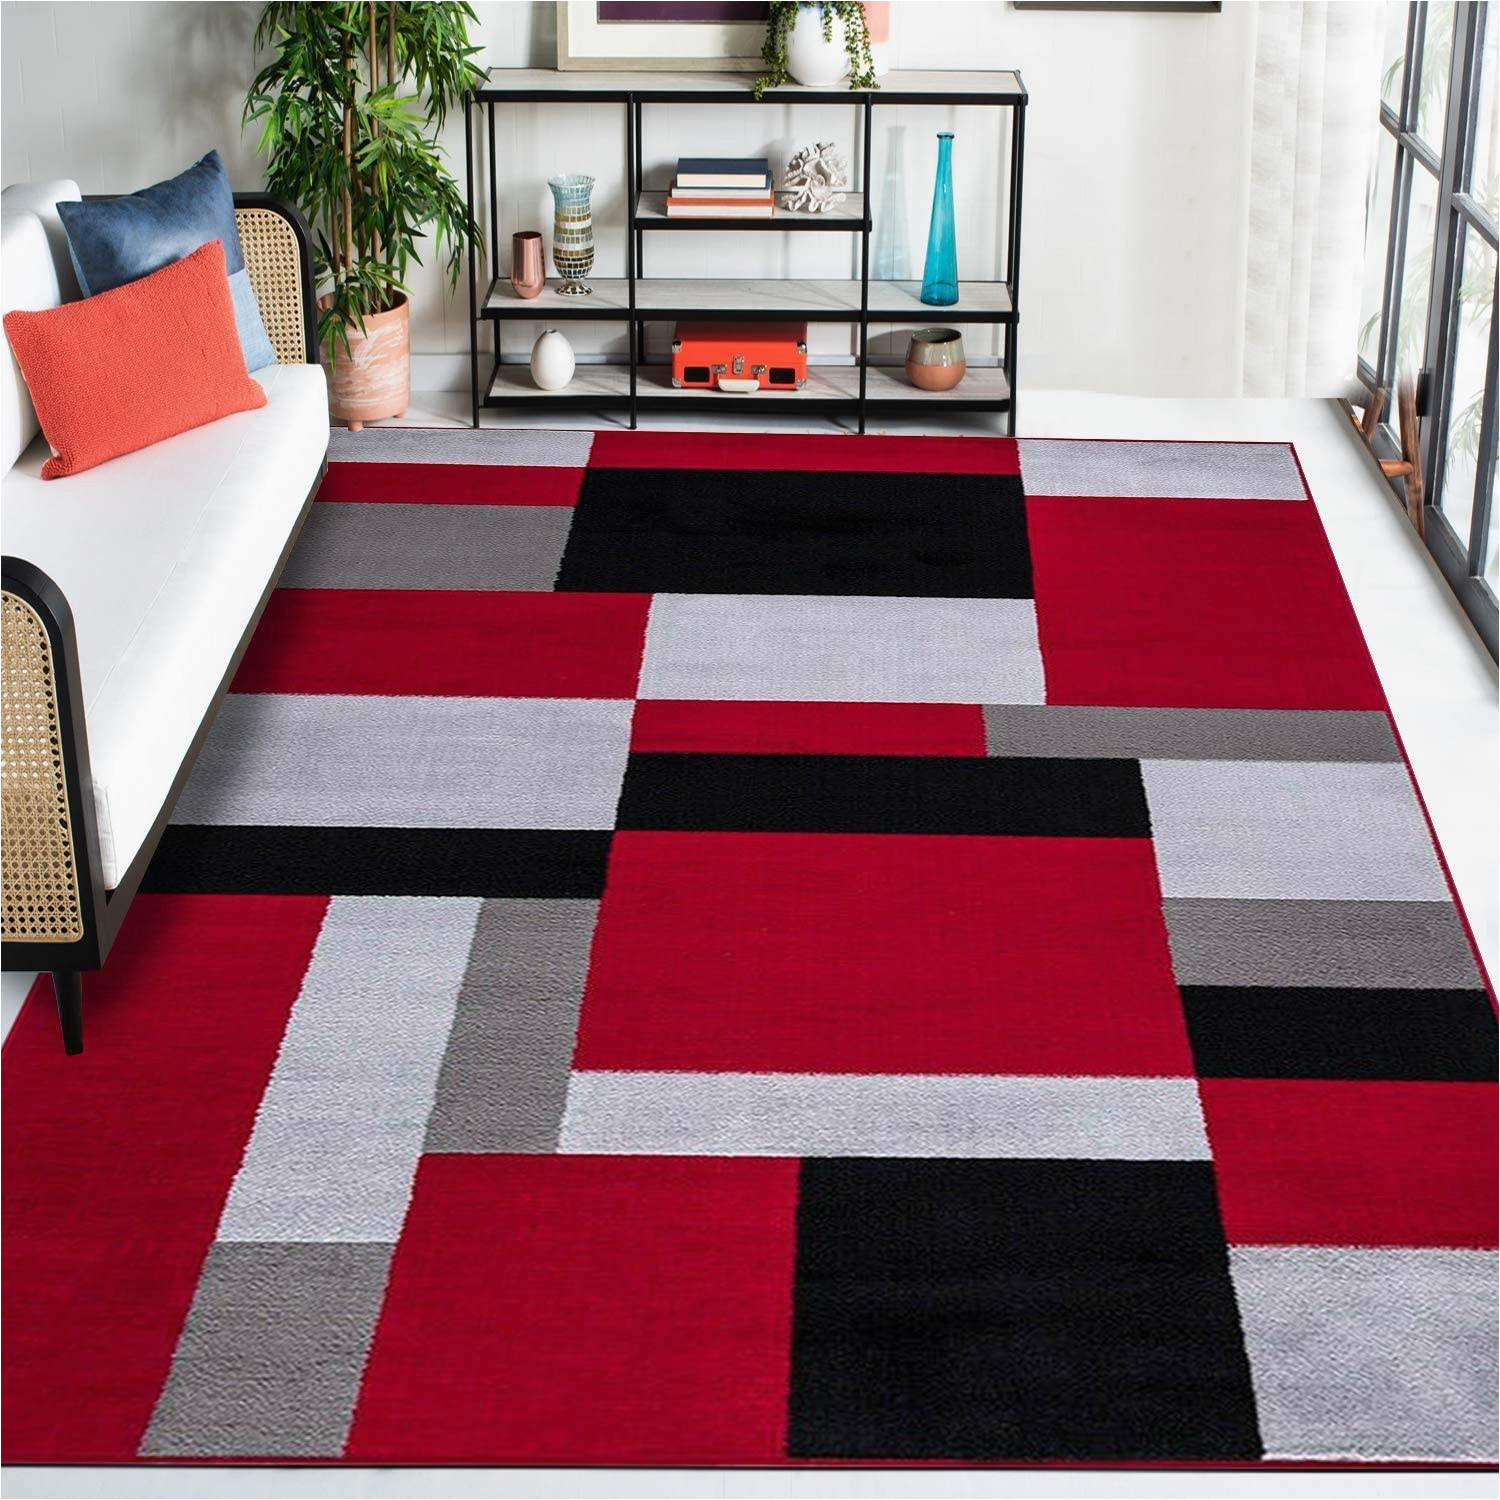 Area Rugs Black and Red Buy Geometric Rug Bedroom Carpet Living Room area Rugs Kitchen …